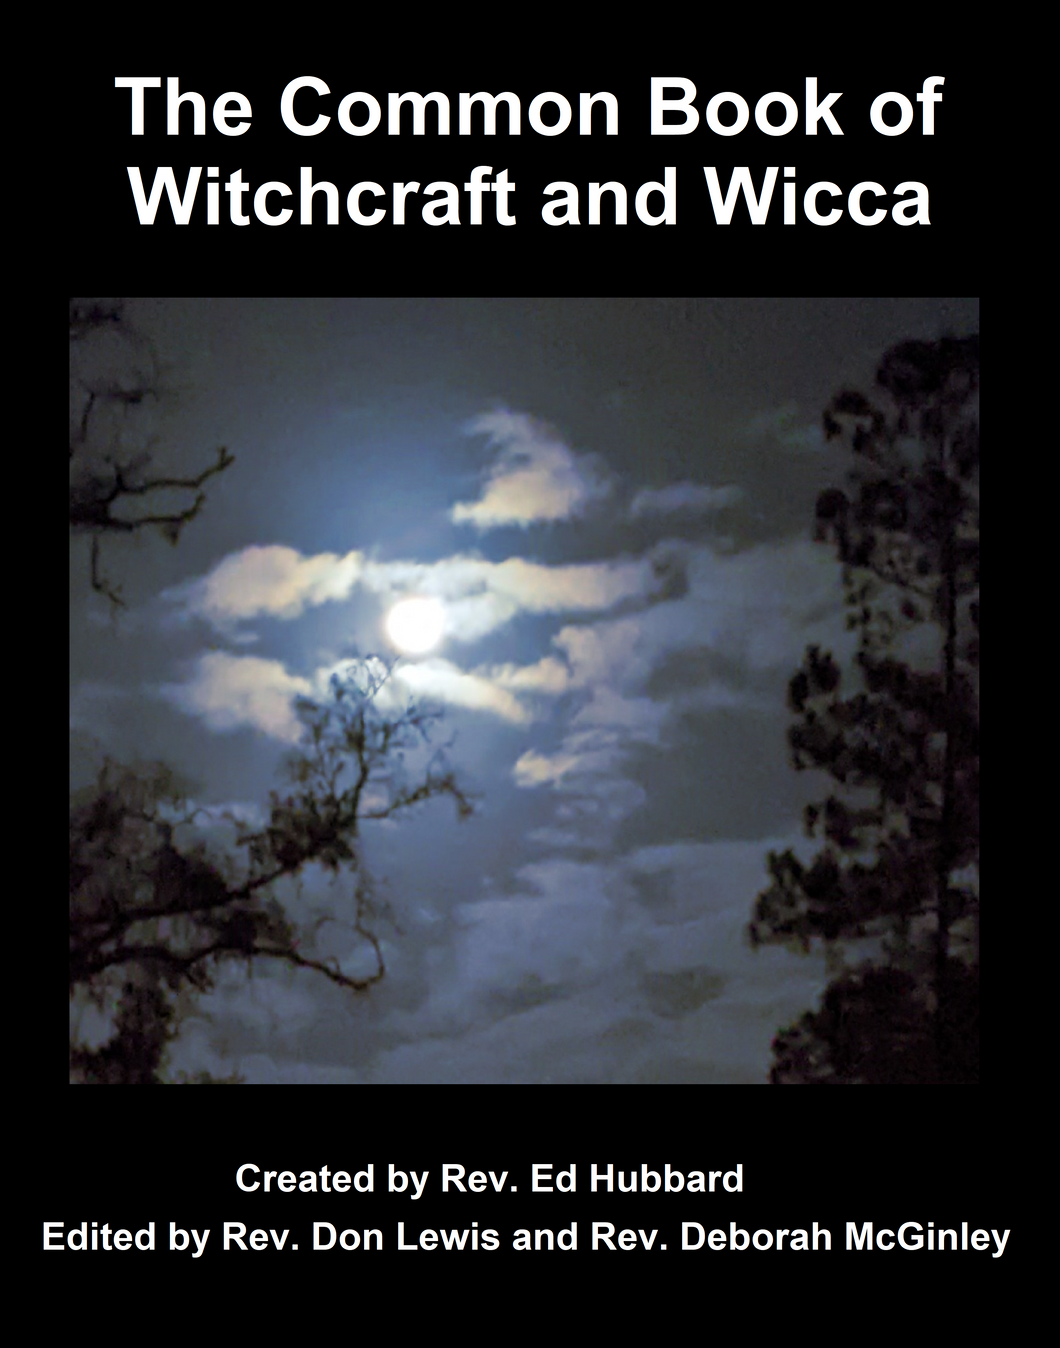 The Common Book of Witchcraft and Wicca eBook.